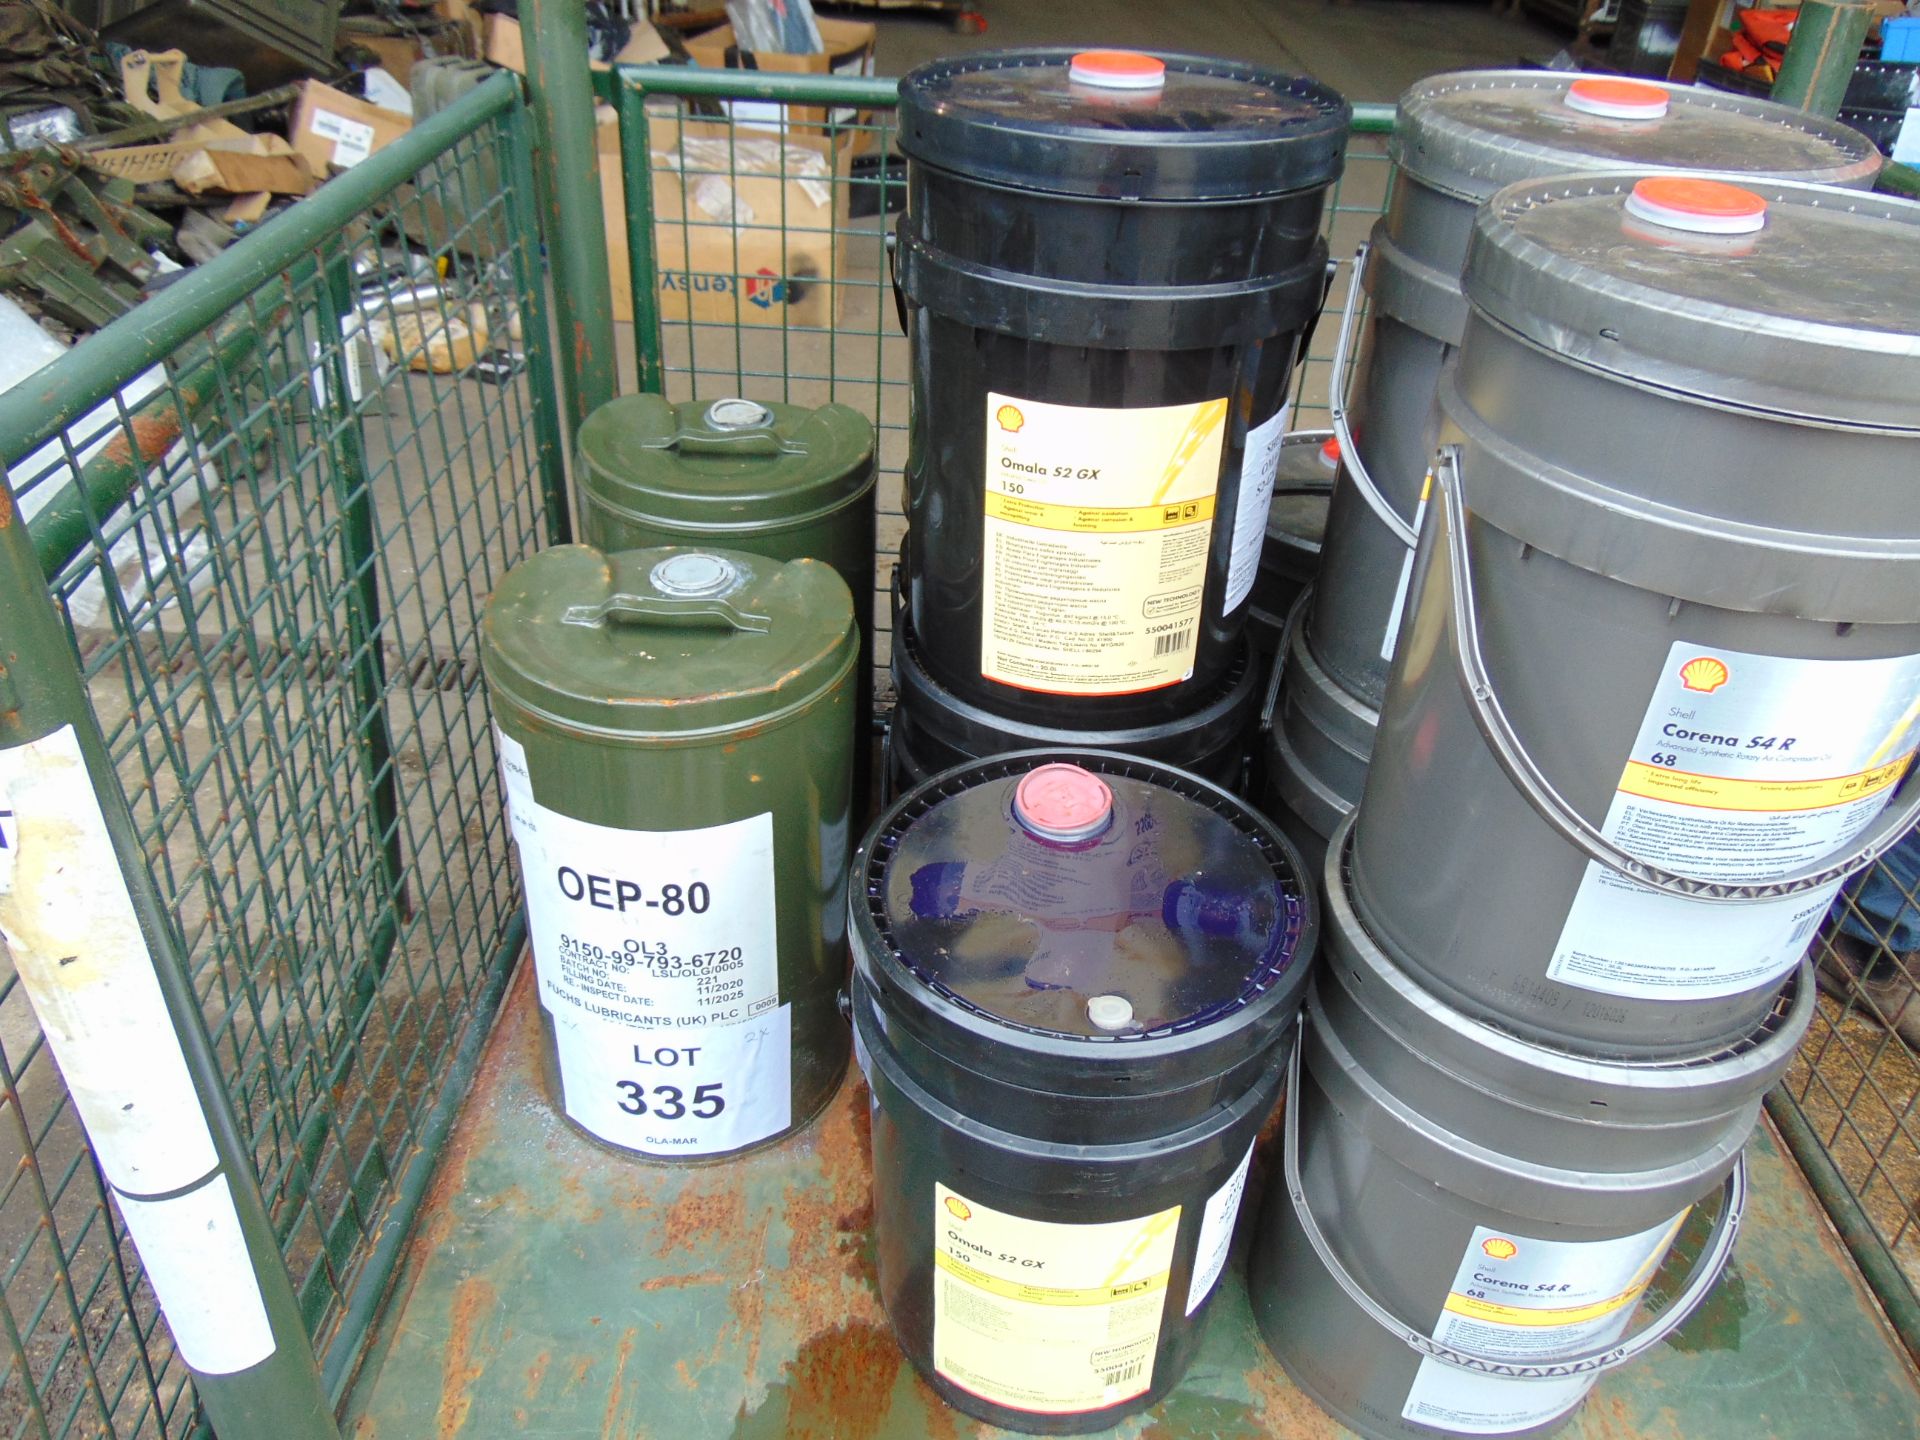 4 x 20 Litre Drums Shell Omala S2 GX High Pressure Gear Oil - Image 2 of 2